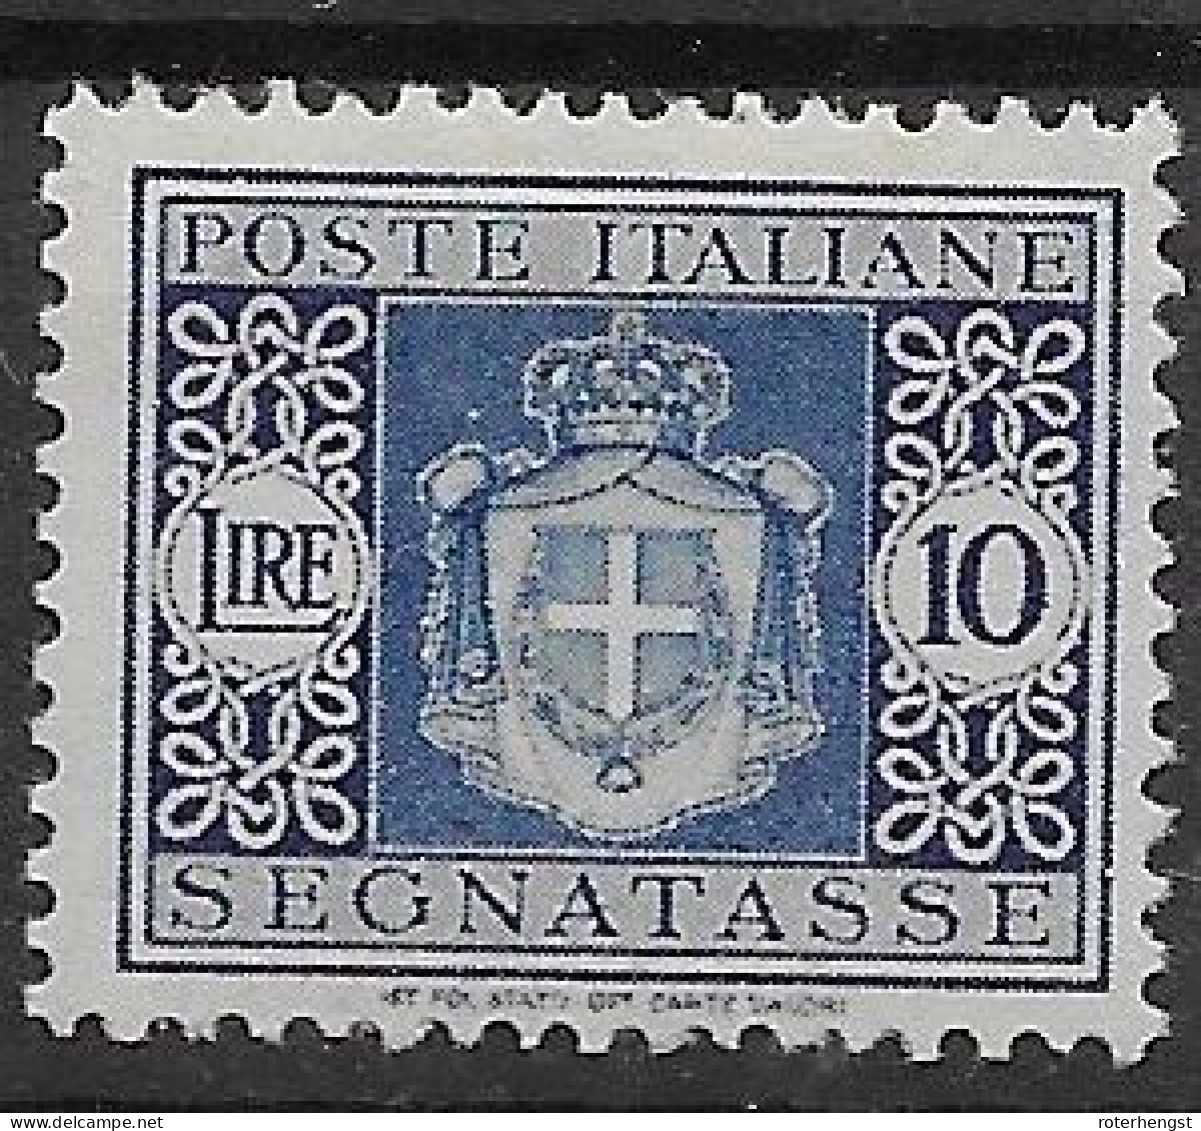 Italy Mnh ** 1945 With Watermark 35 Euros - Postal Parcels